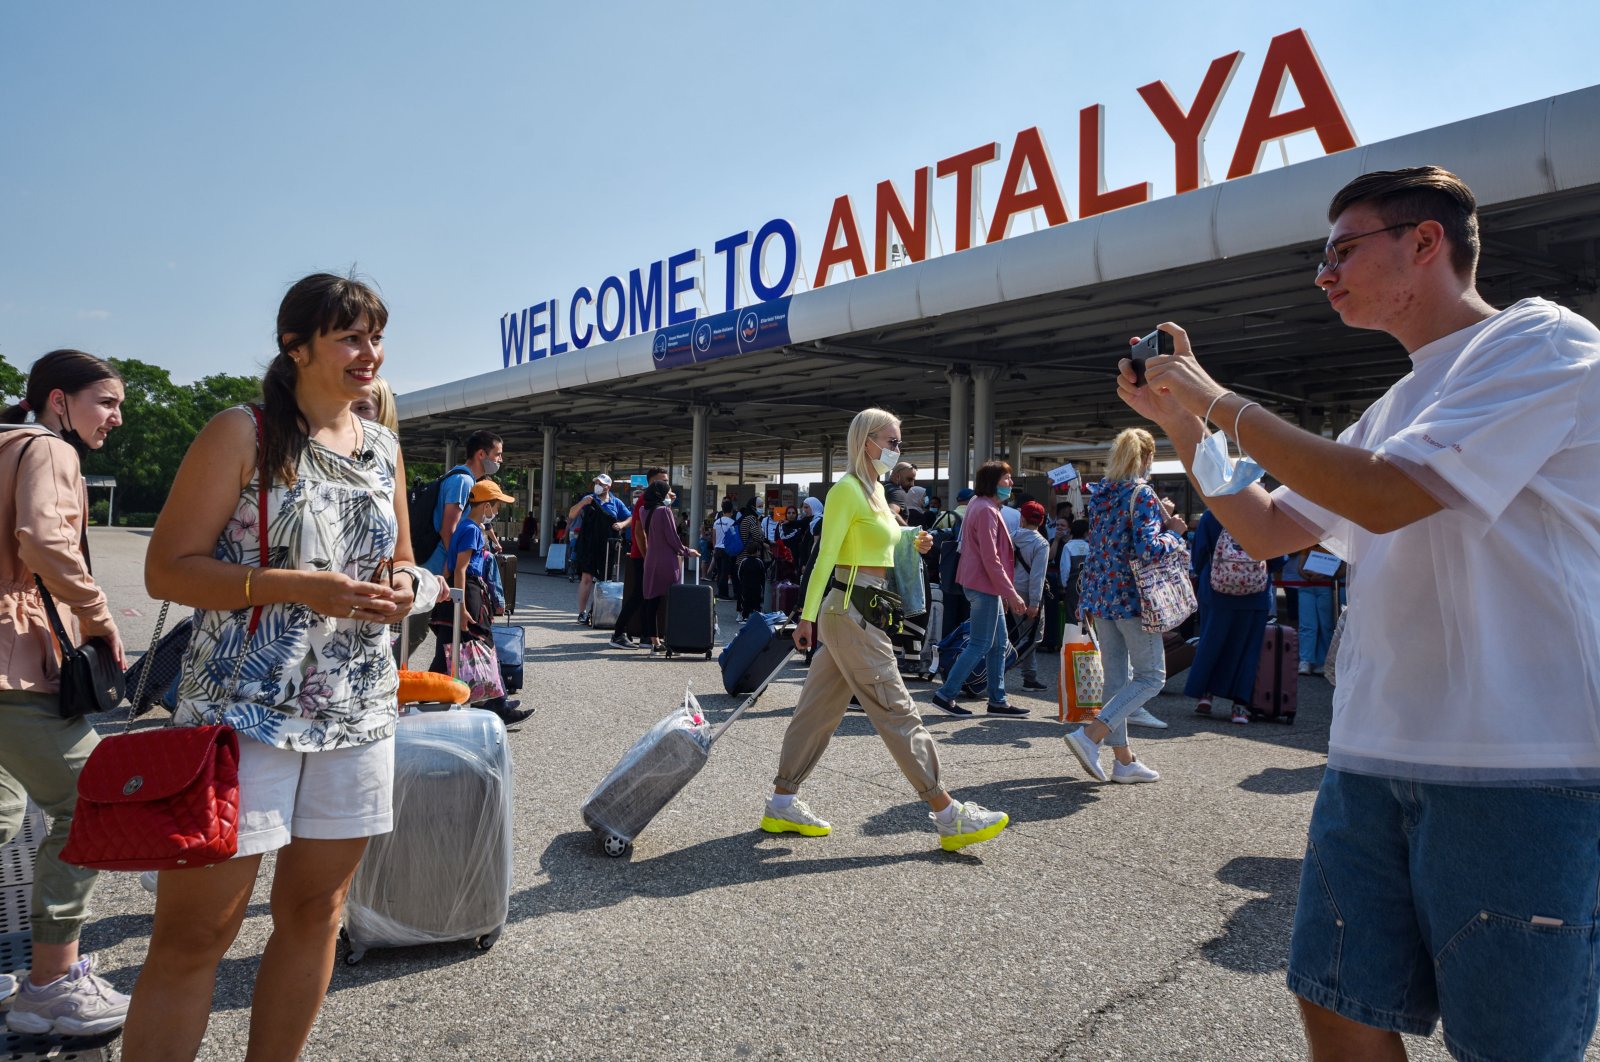 Tourists arrive at an airport in Antalya, one of the most popular tourist destinations in the Mediterranean, Turkey, June 22, 2021. (DHA Photo)